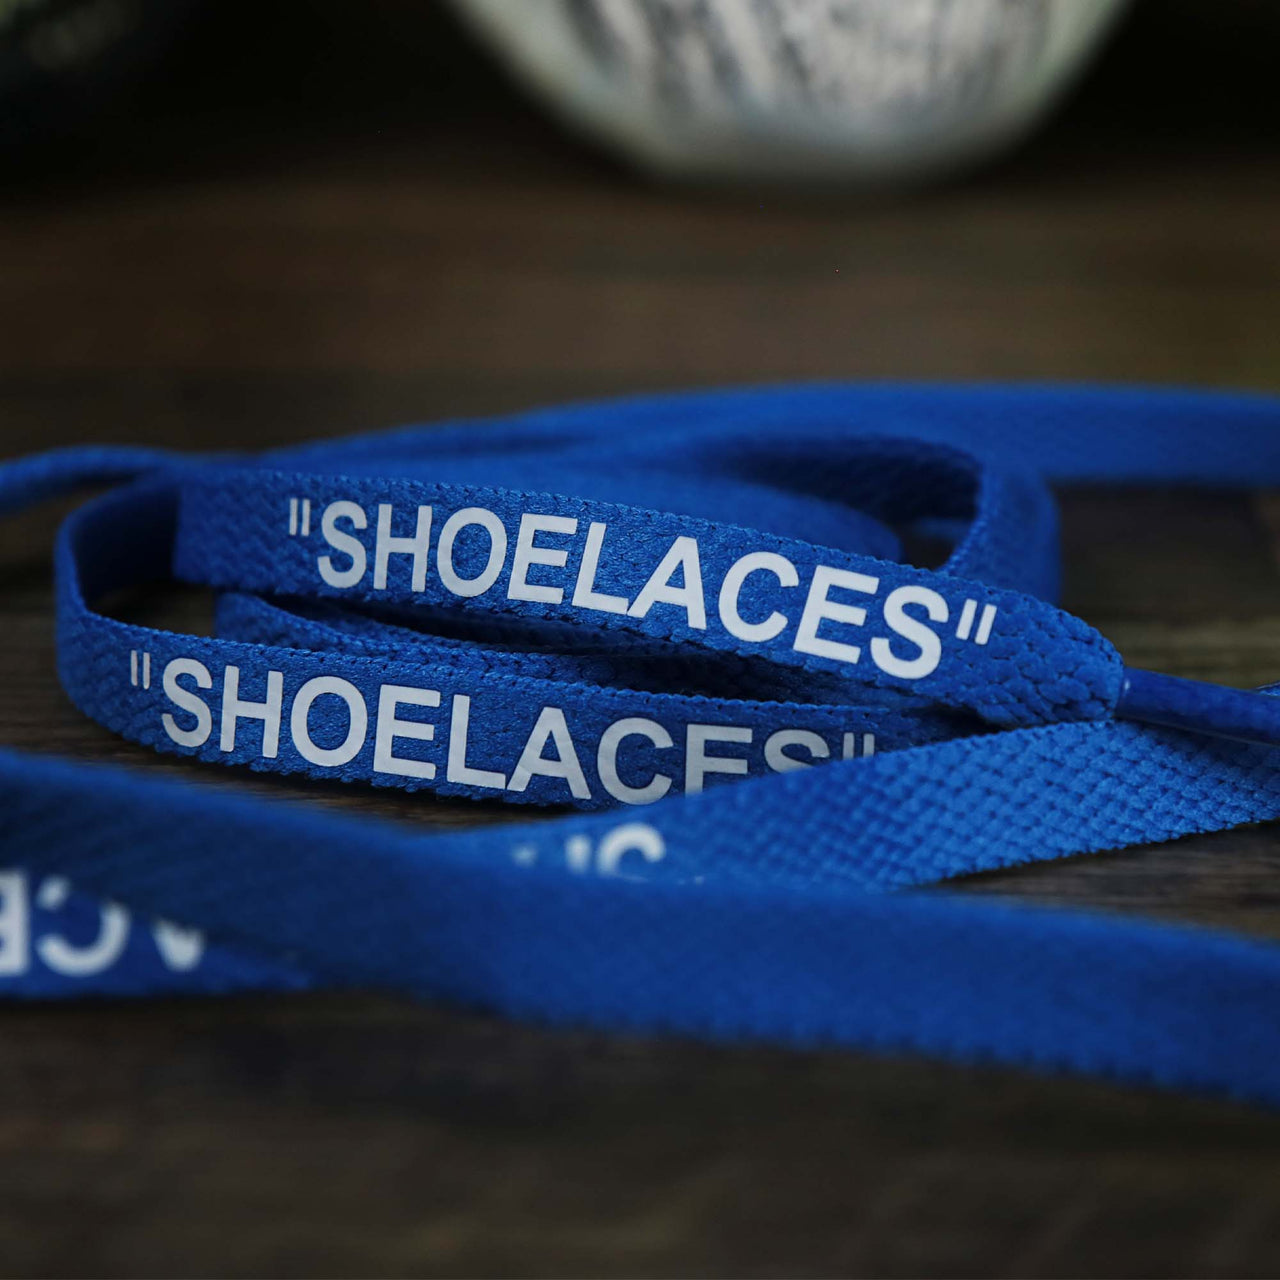 The Flat Blue Shoelaces with “Shoelaces” Print | 120cm Capswag unfolded